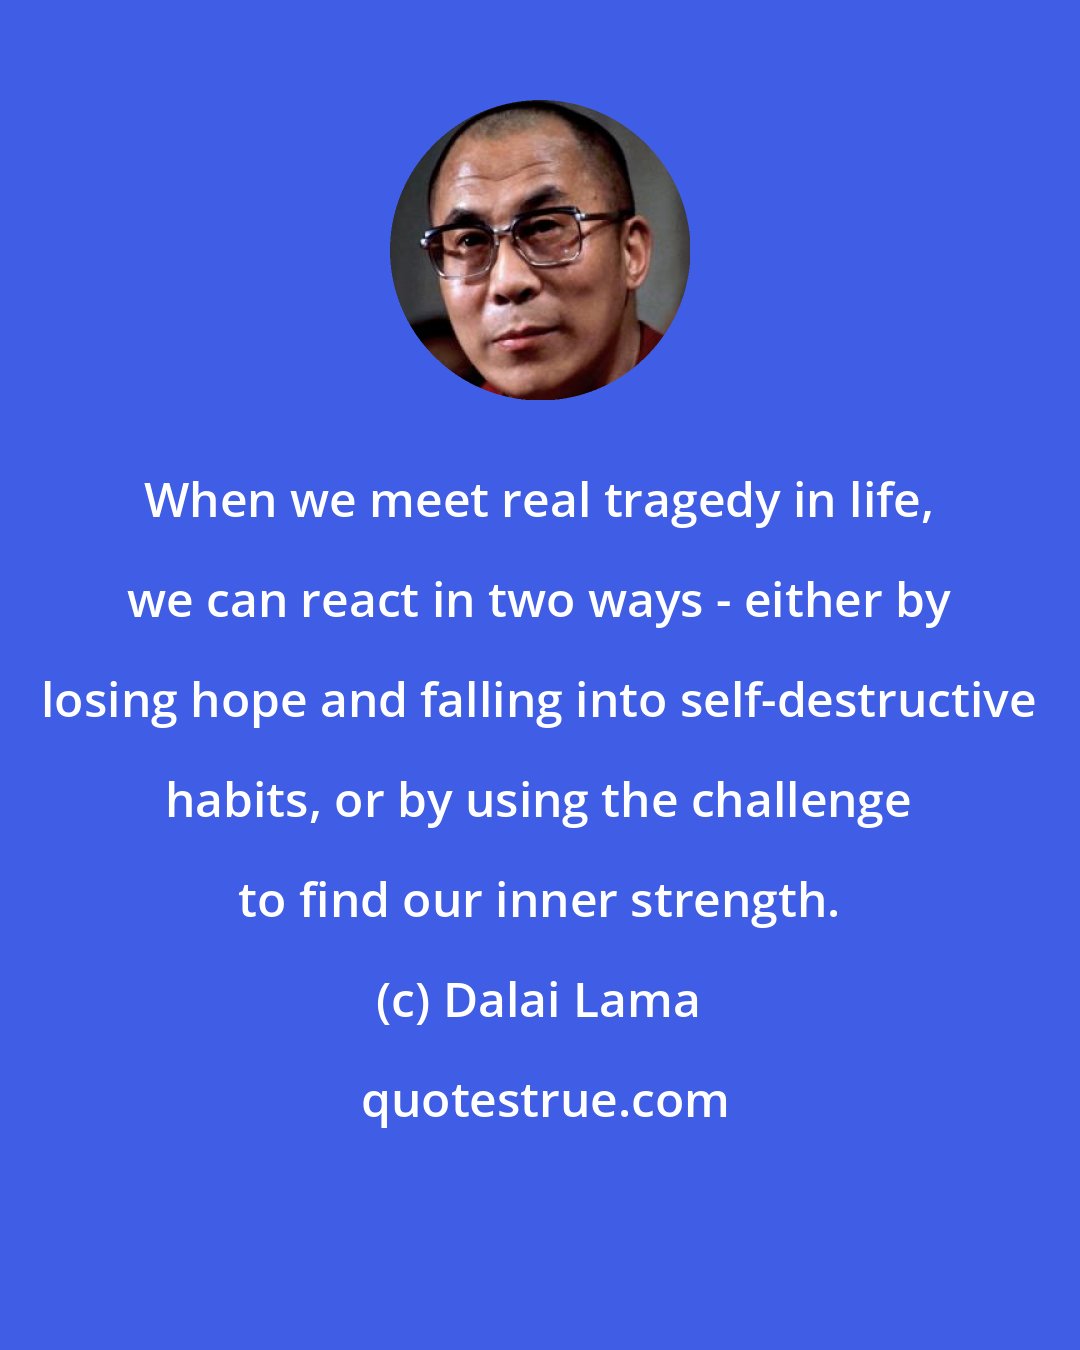 Dalai Lama: When we meet real tragedy in life, we can react in two ways - either by losing hope and falling into self-destructive habits, or by using the challenge to find our inner strength.